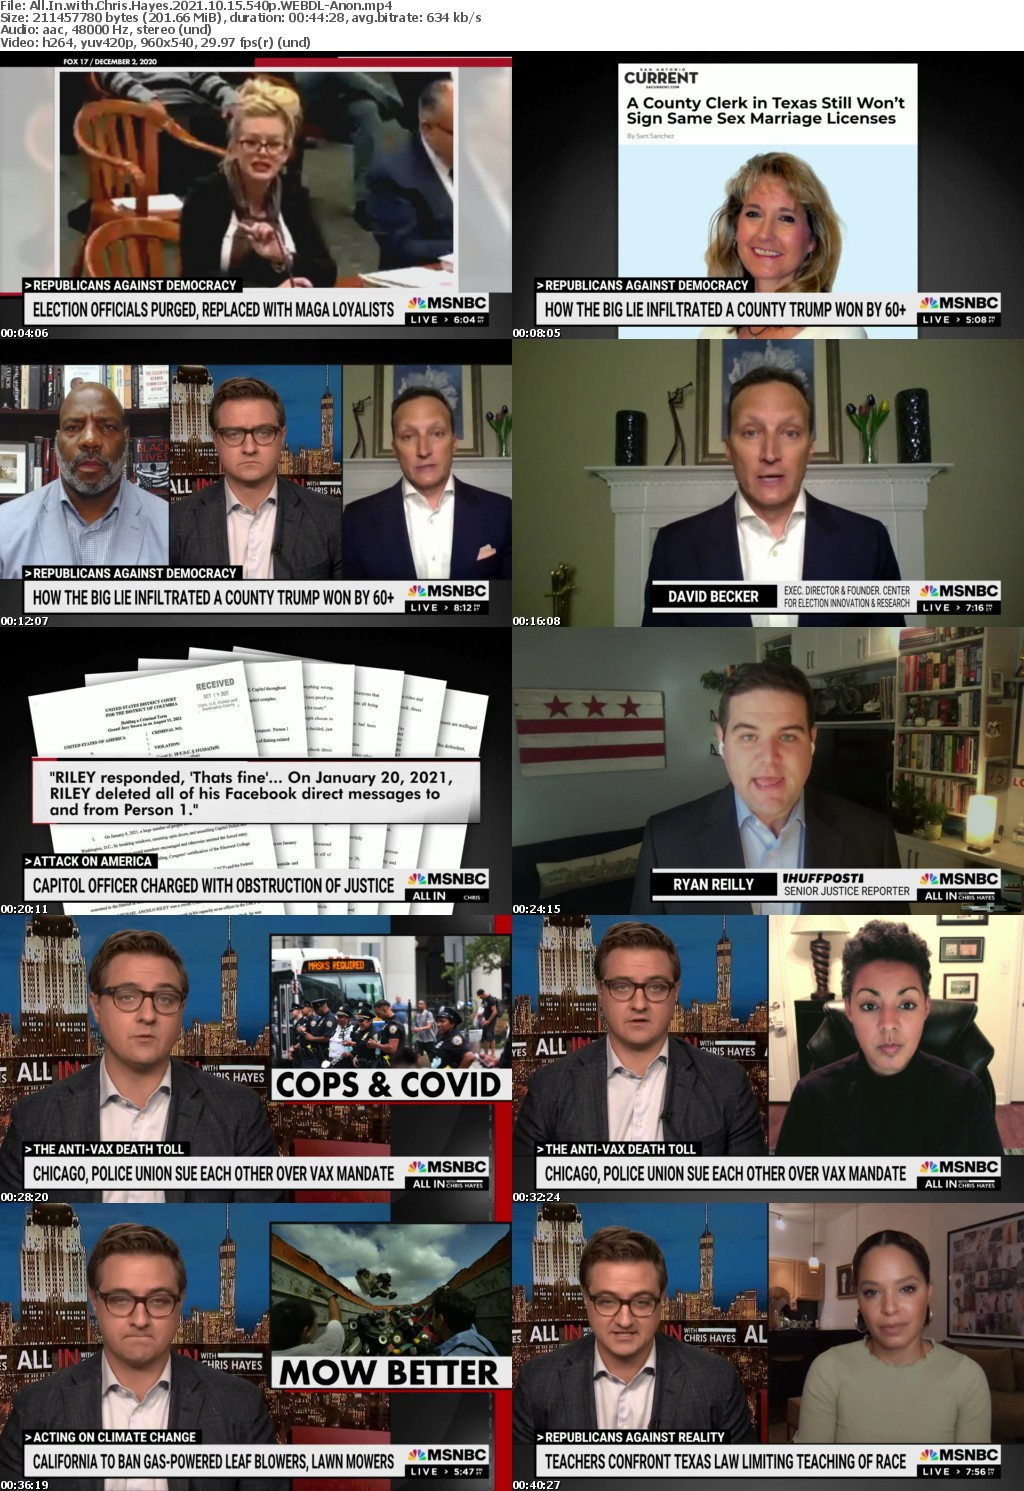 All In with Chris Hayes 2021 10 15 540p WEBDL-Anon